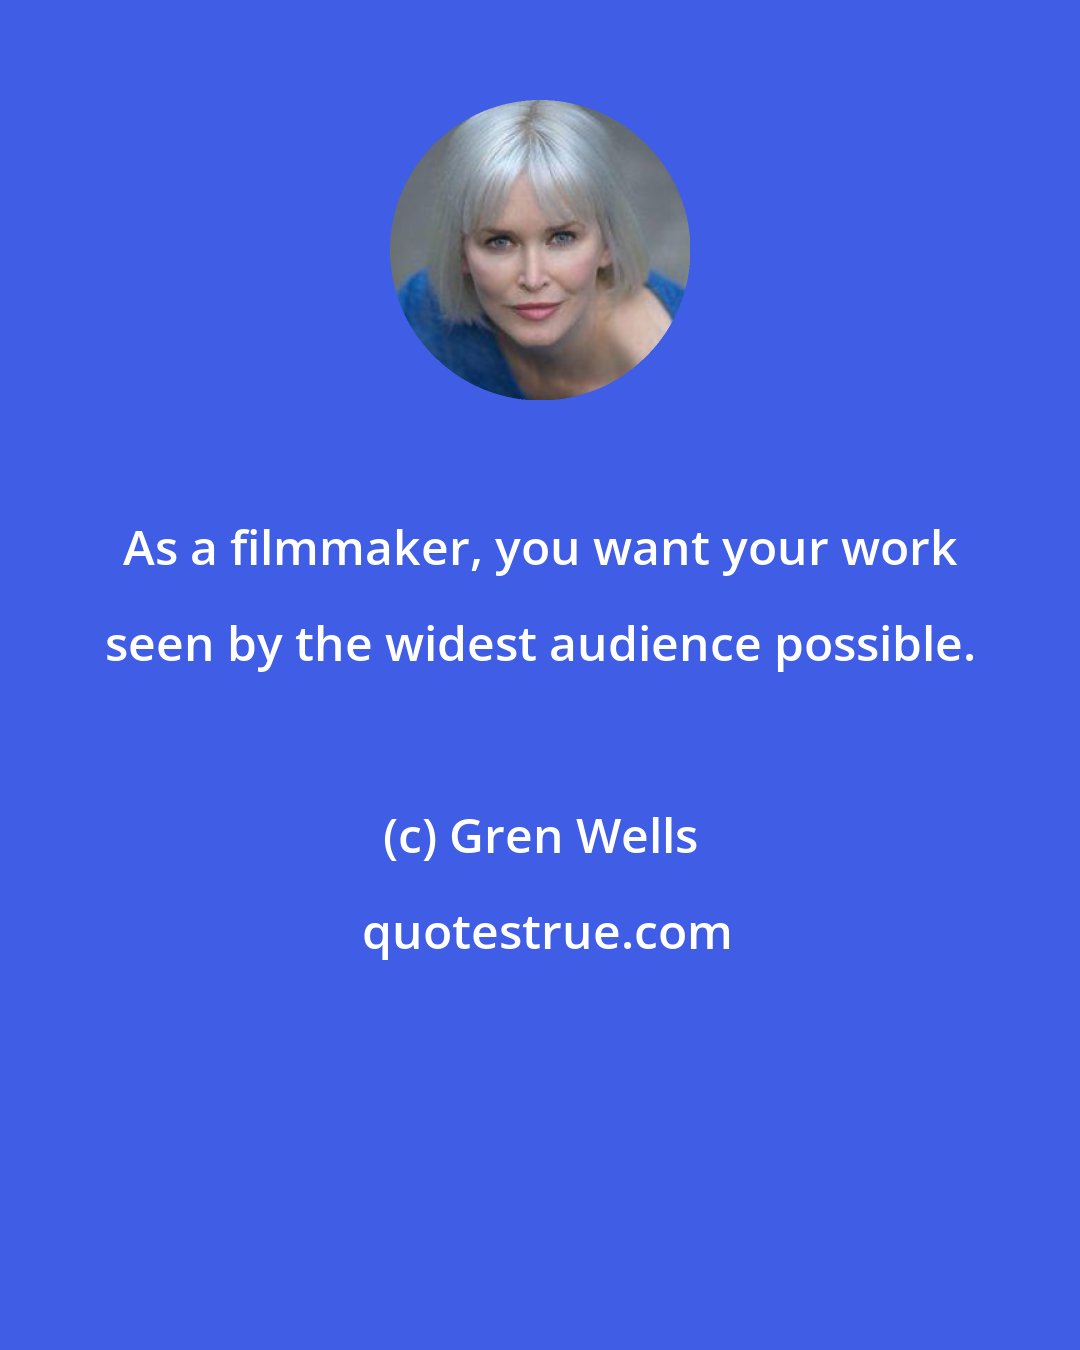 Gren Wells: As a filmmaker, you want your work seen by the widest audience possible.